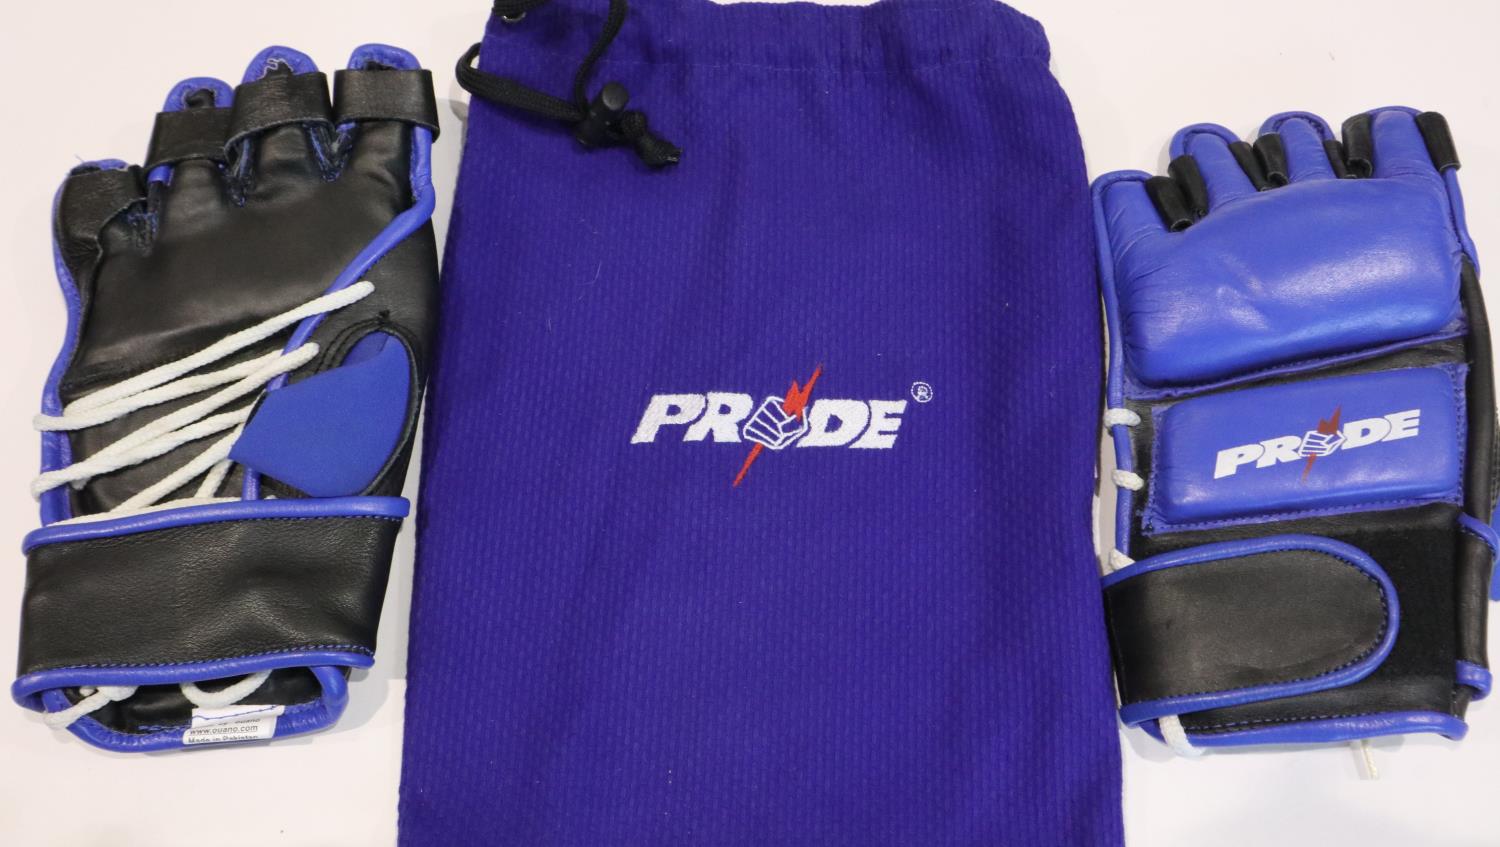 Pair of Pride UFC fighting gloves with bag. UK P&P Group 1 (£16+VAT for the first lot and £2+VAT for